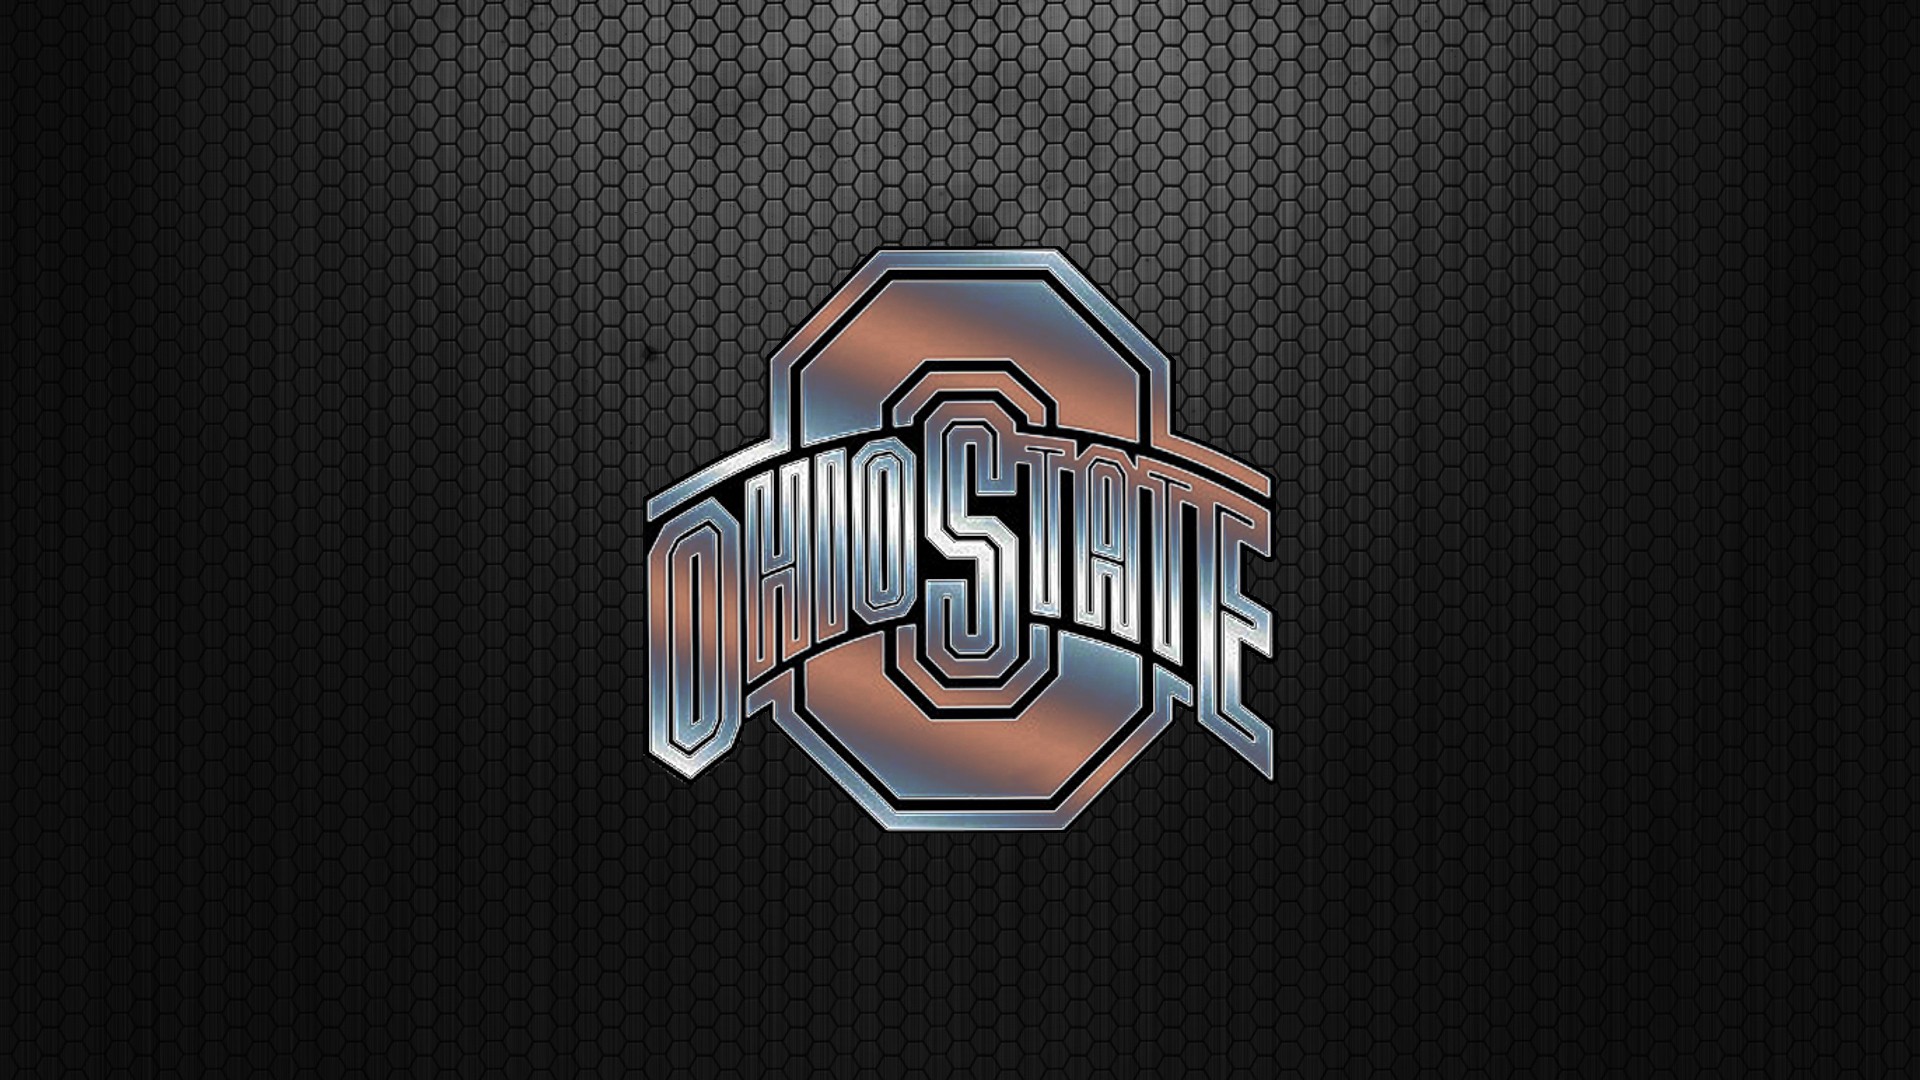 1920x1080 Wallpapers Ohio State Football 1024 X 576 596 Kb Png | HD Wallpapers .